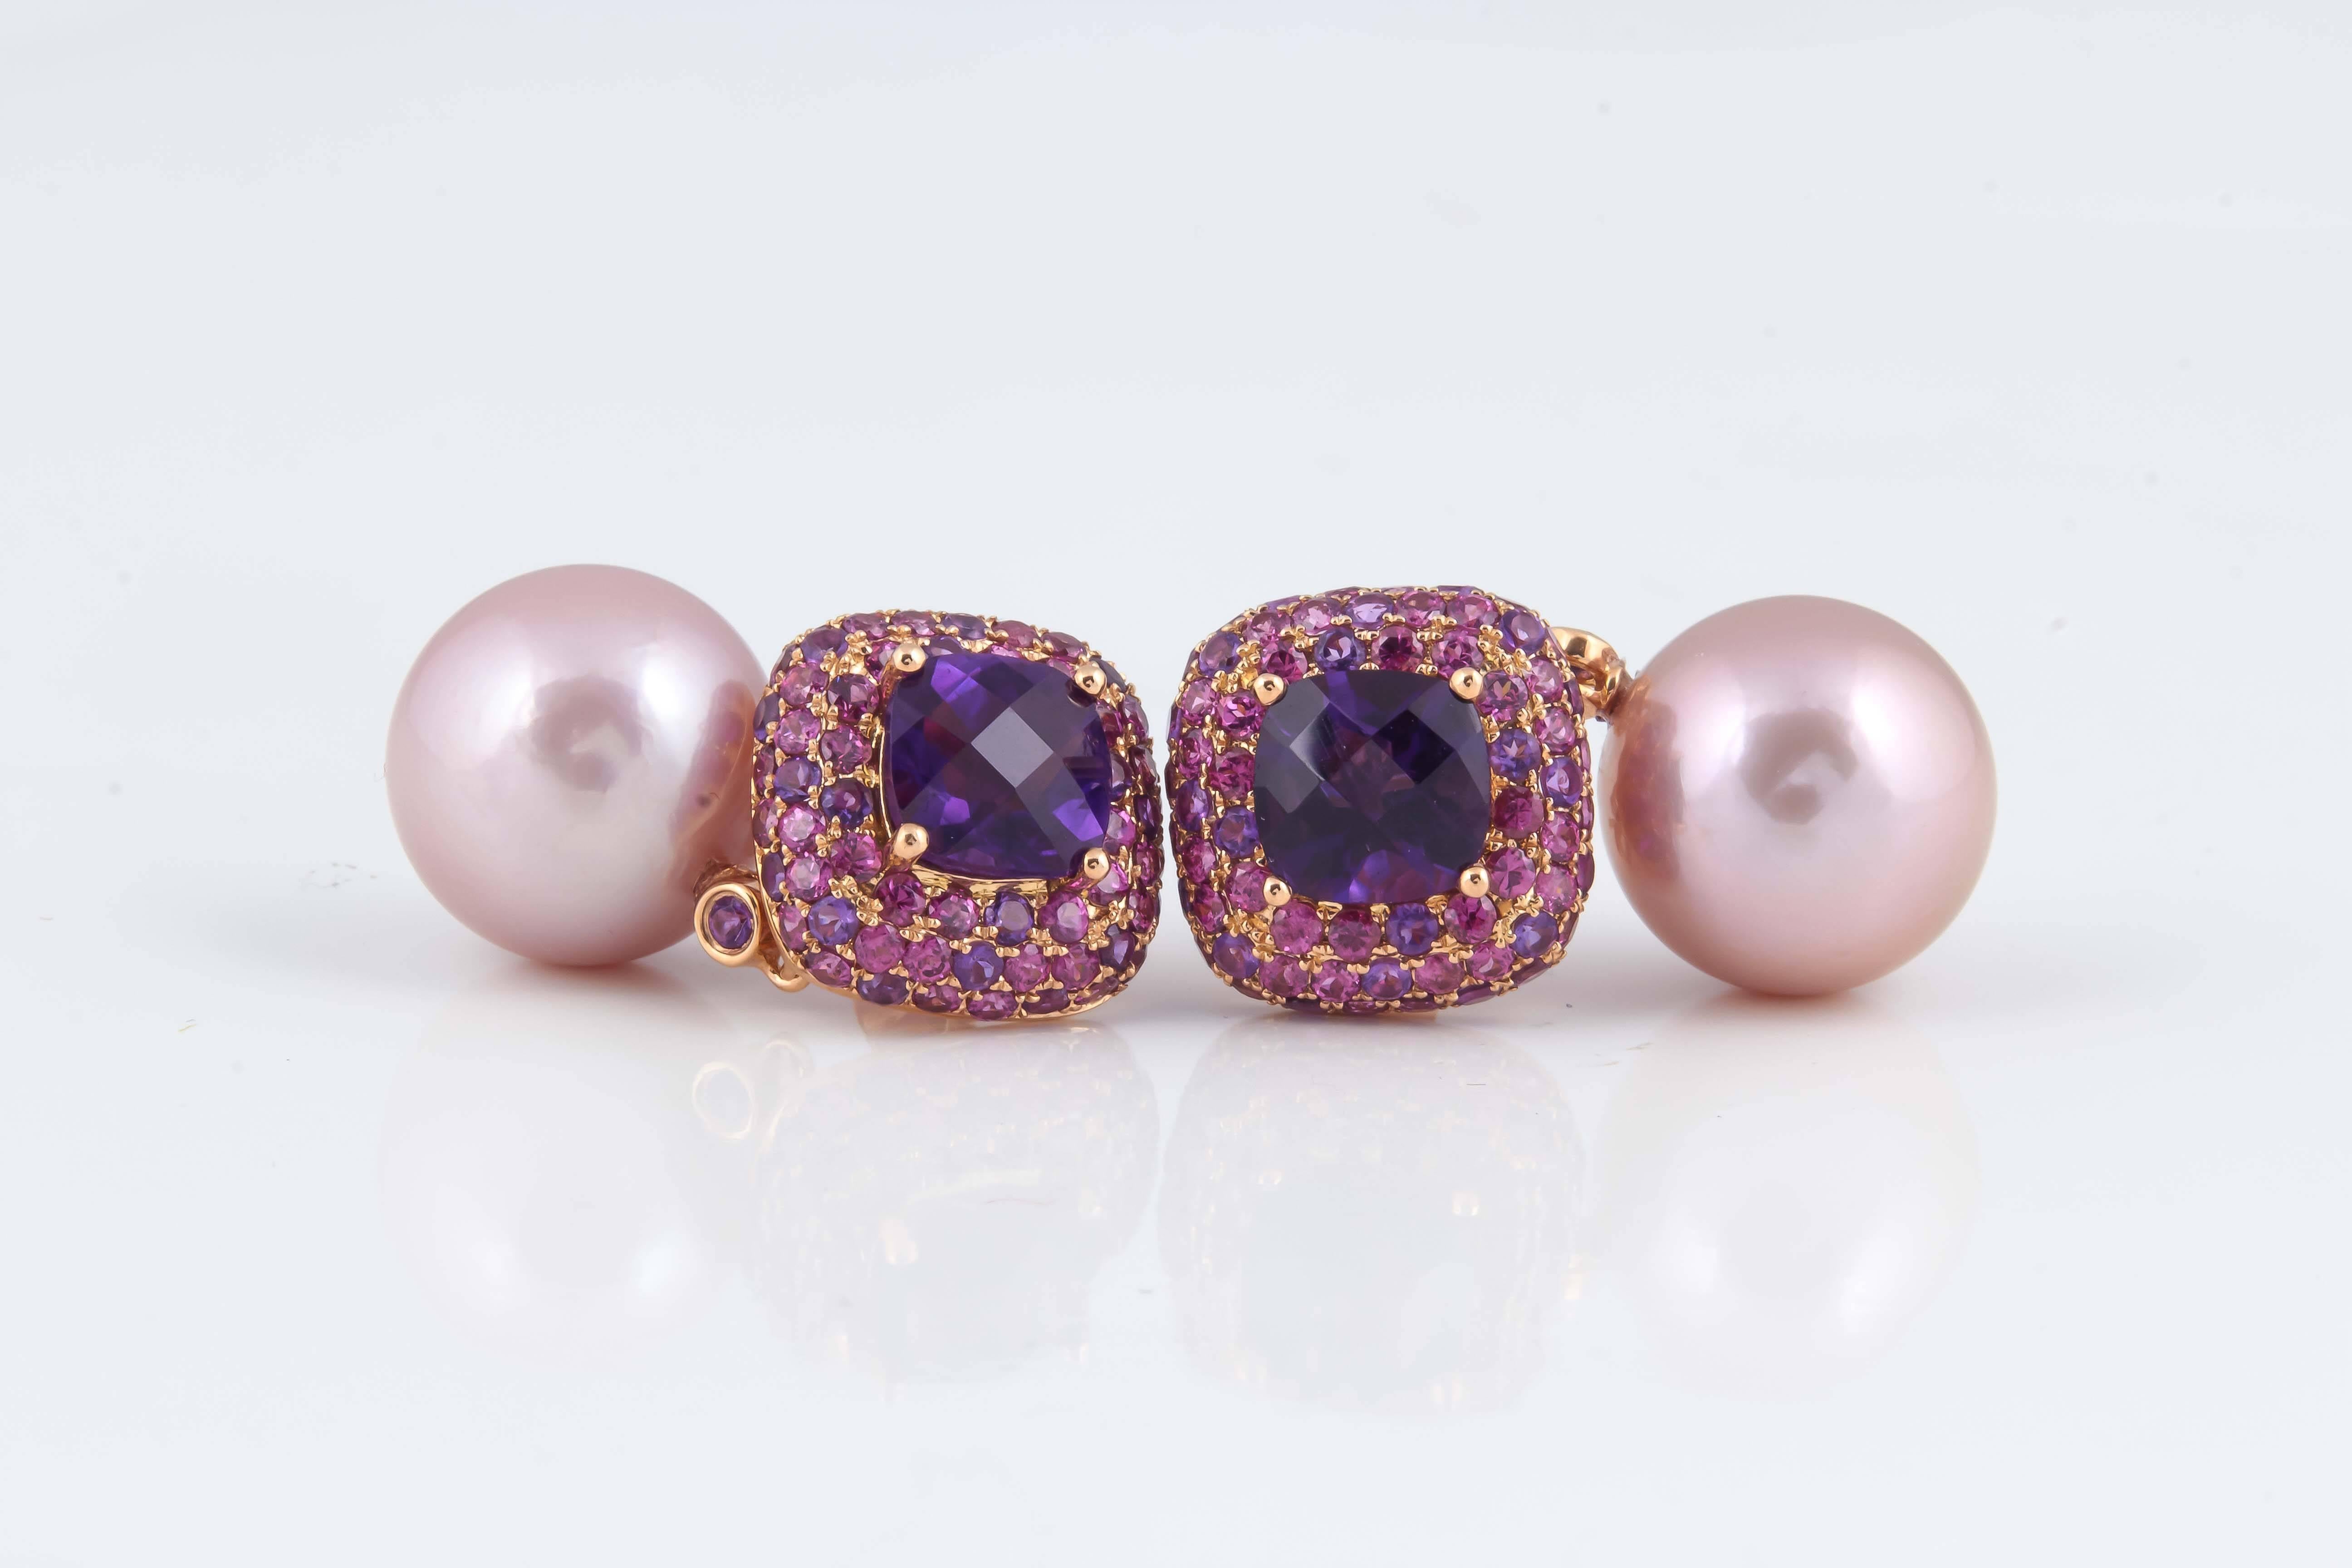 7 Cts Amethyst
14-15 mm 
Pink Freshwater Pearl
18K Rose Gold
The pearl can be removed and the top part of the earrings can be used as studs!!!